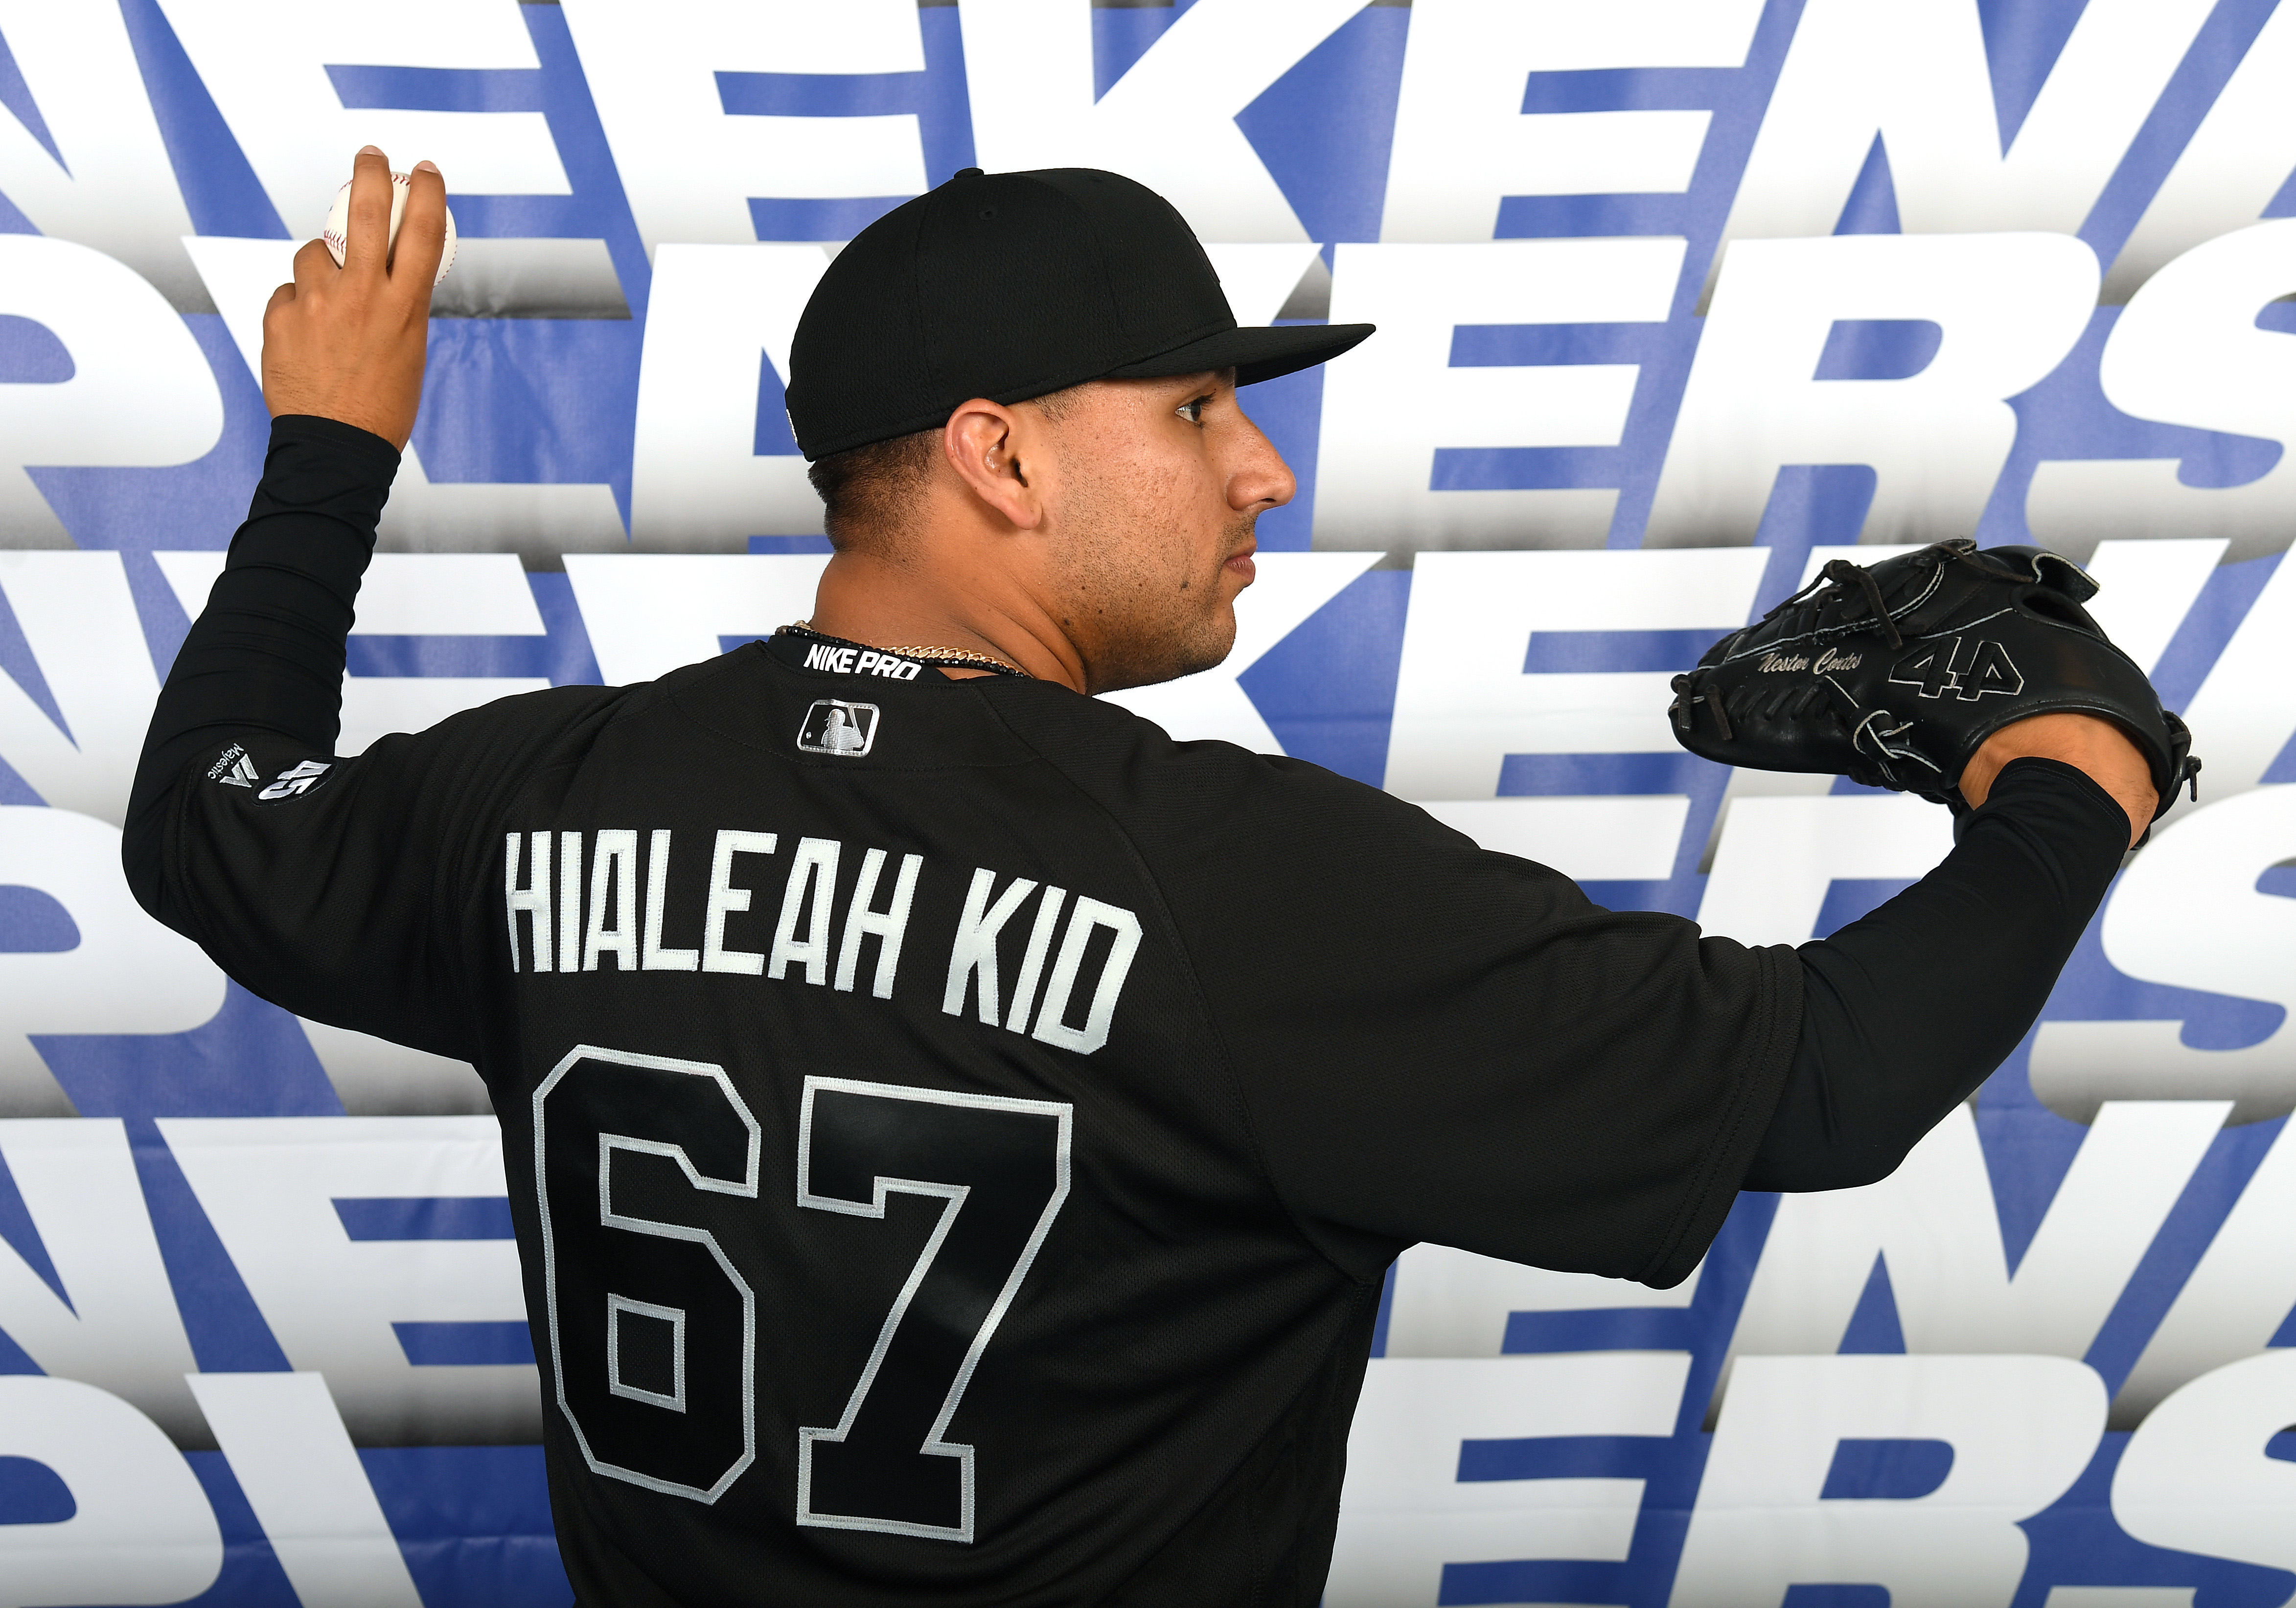 Yankees to Wear Weird Black Road Uniforms on Players Weekend 2019